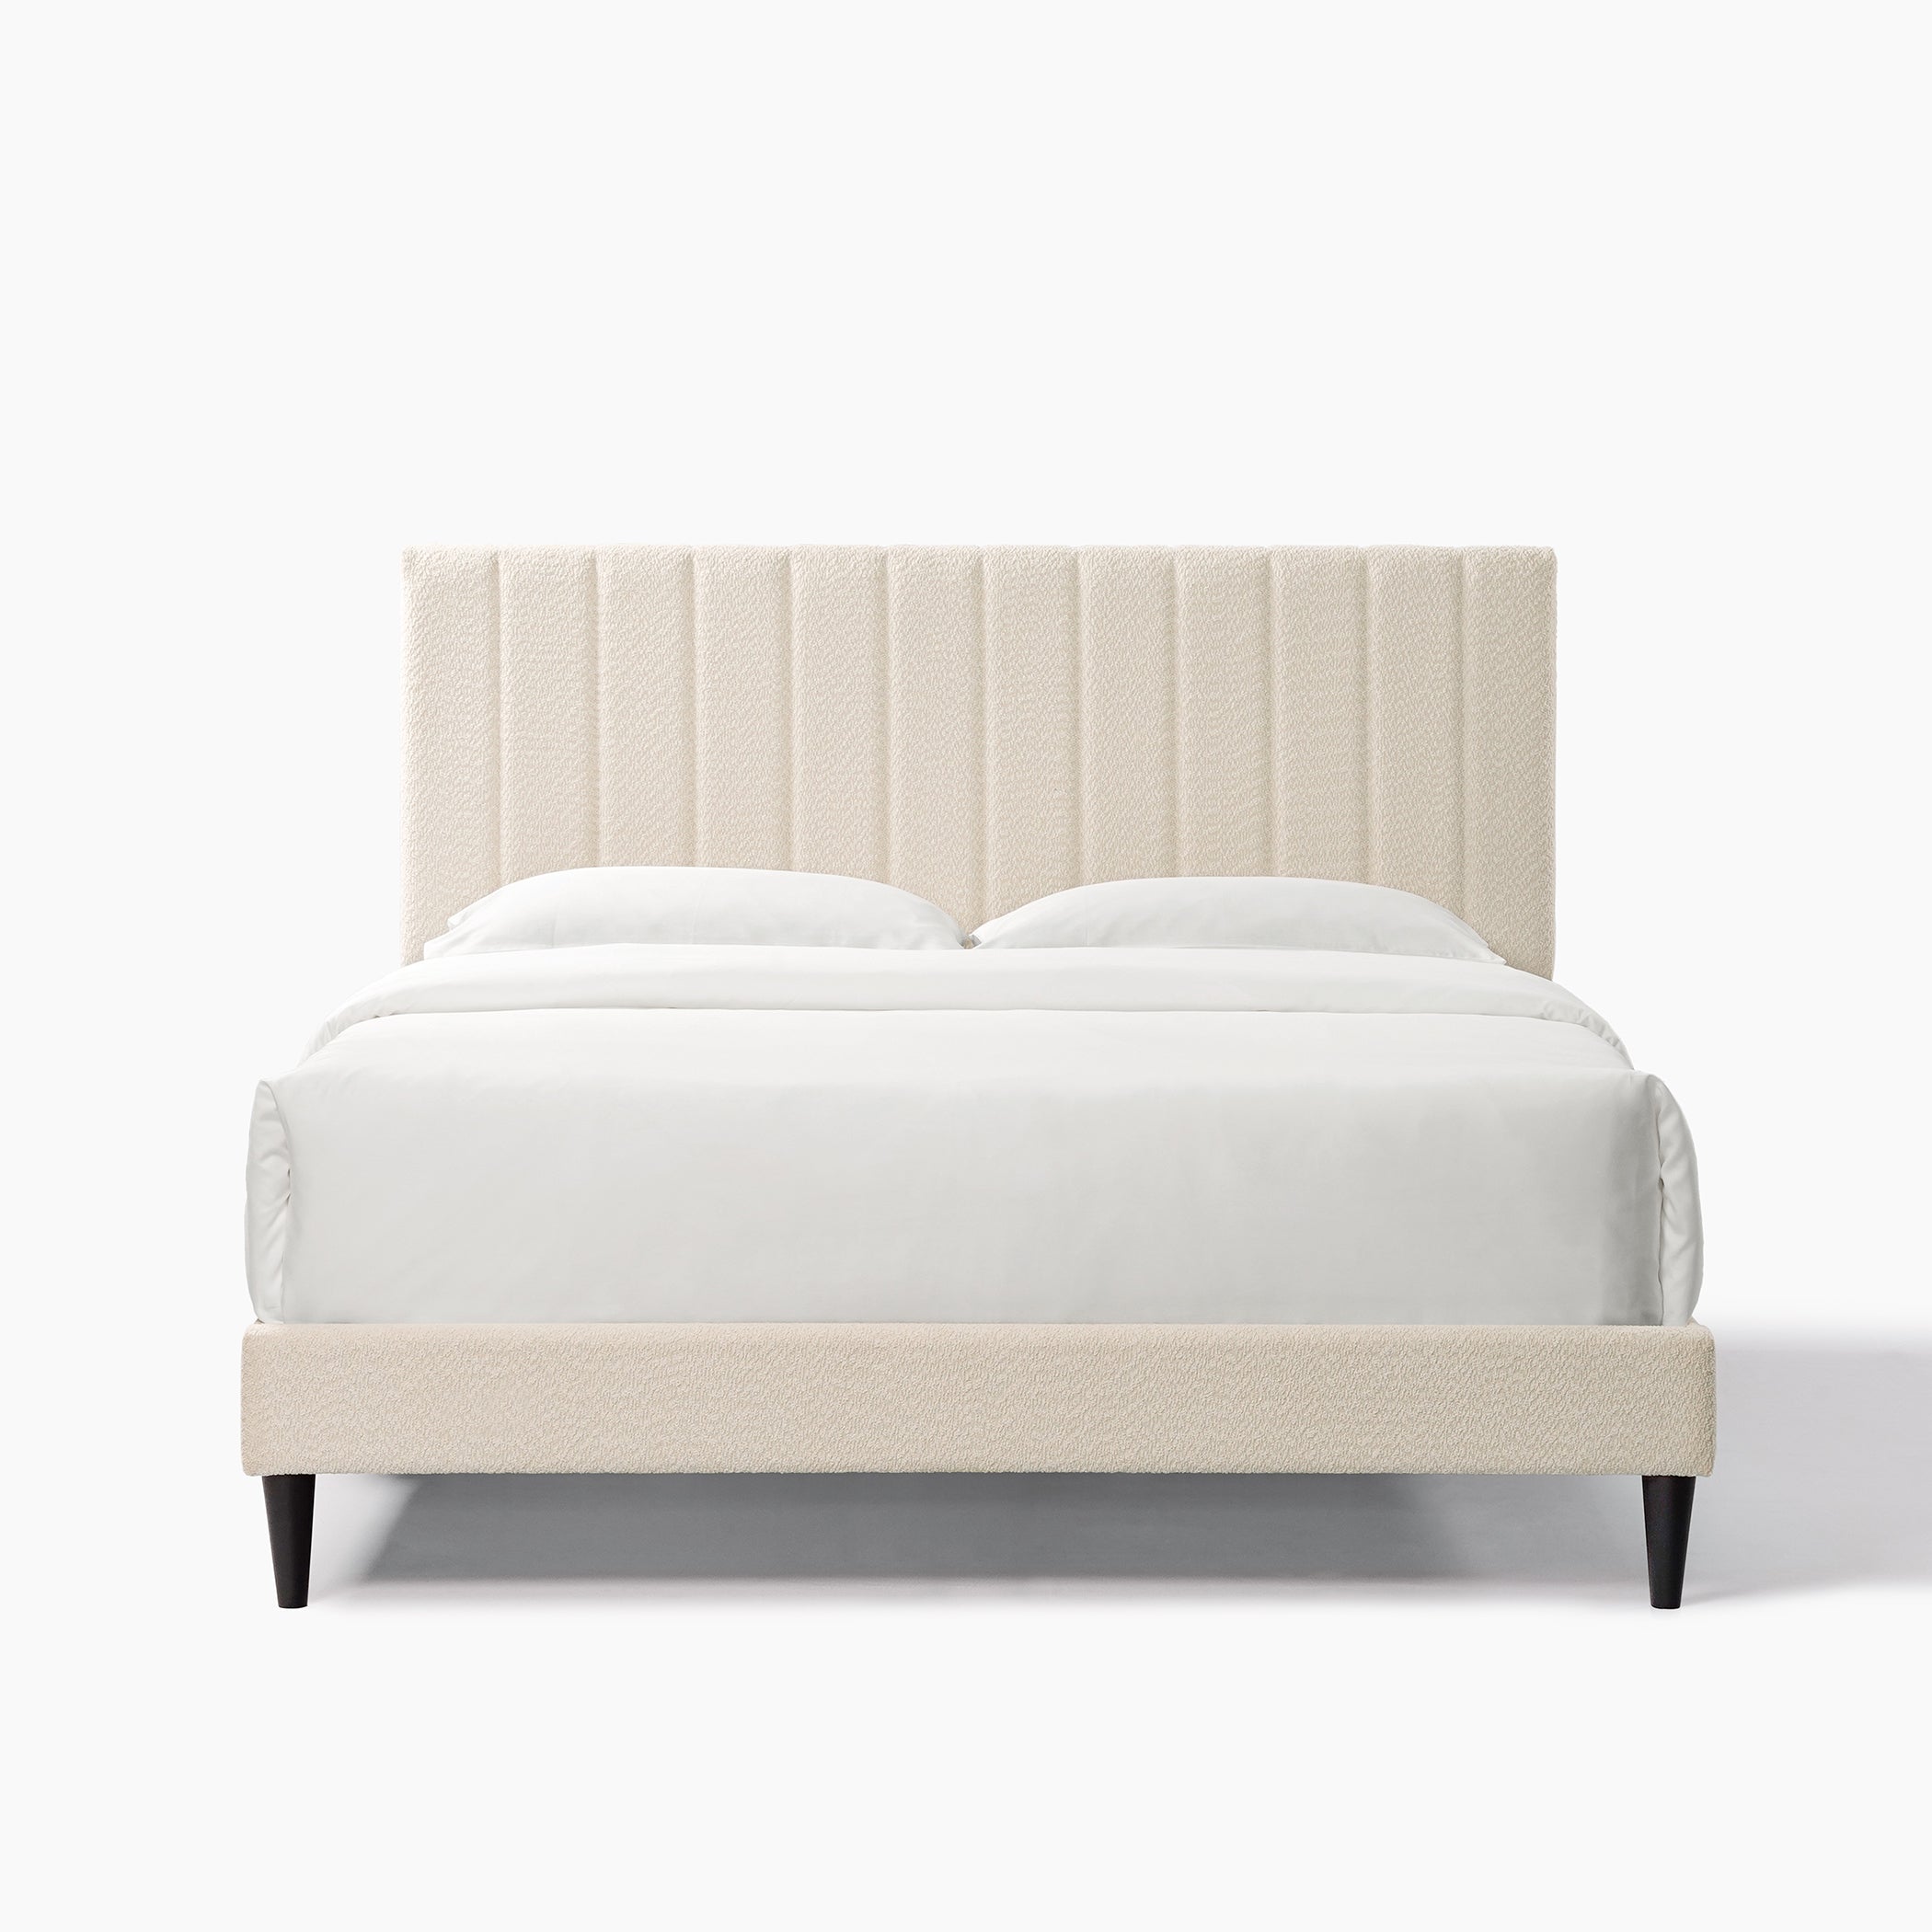 🆓🚛 Dove Tufted Upholstered Platform Bed - Pearl White - Queen